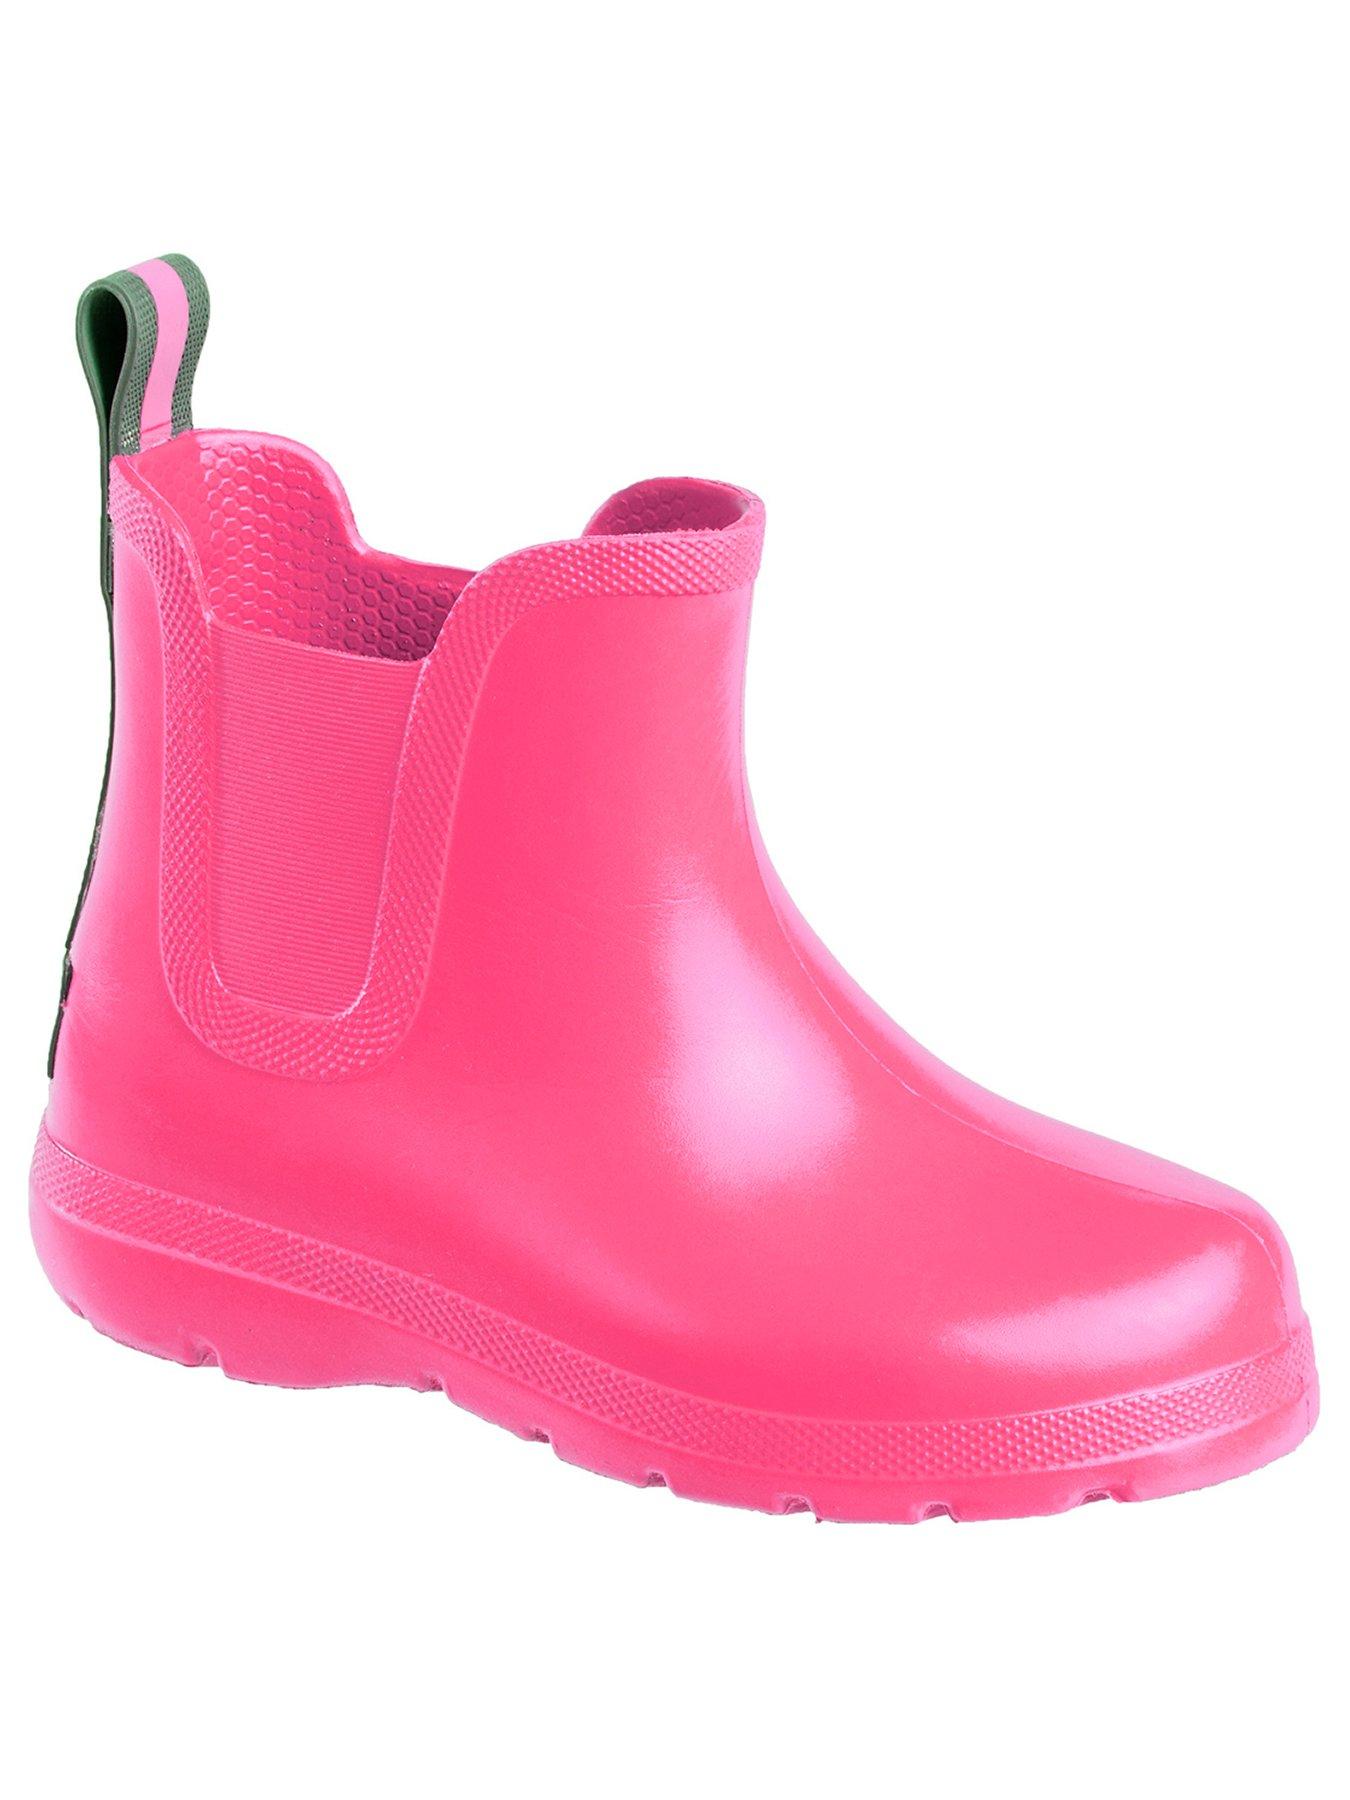 Shoes & boots Kids Chelsea Rain Boot - Pink